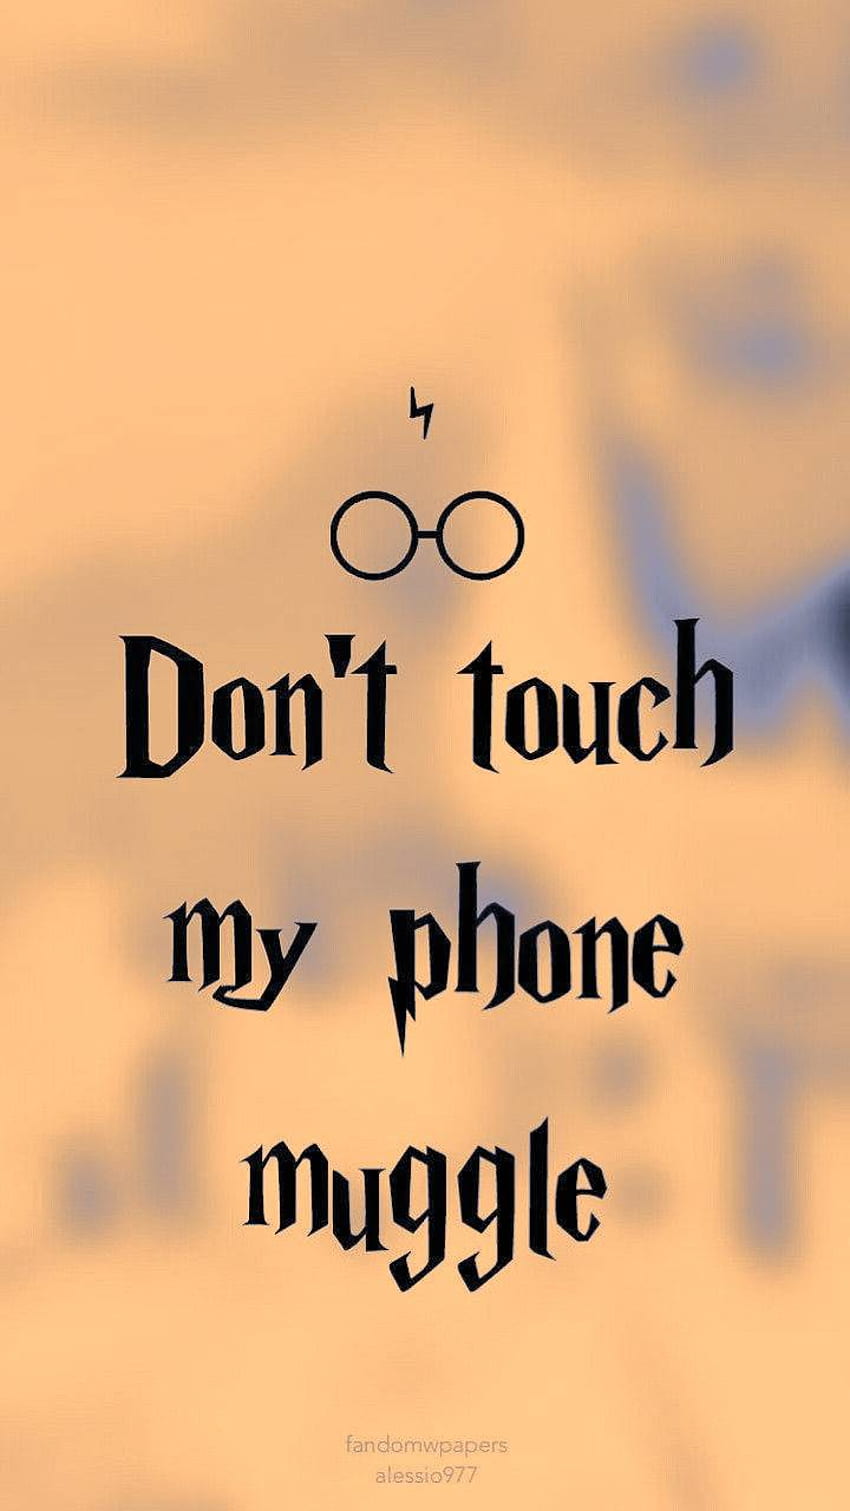 Harry Potter Wallpaper  Dont touch my phone muggle  Harry potter  wallpaper Harry potter lock screen Harry potter background